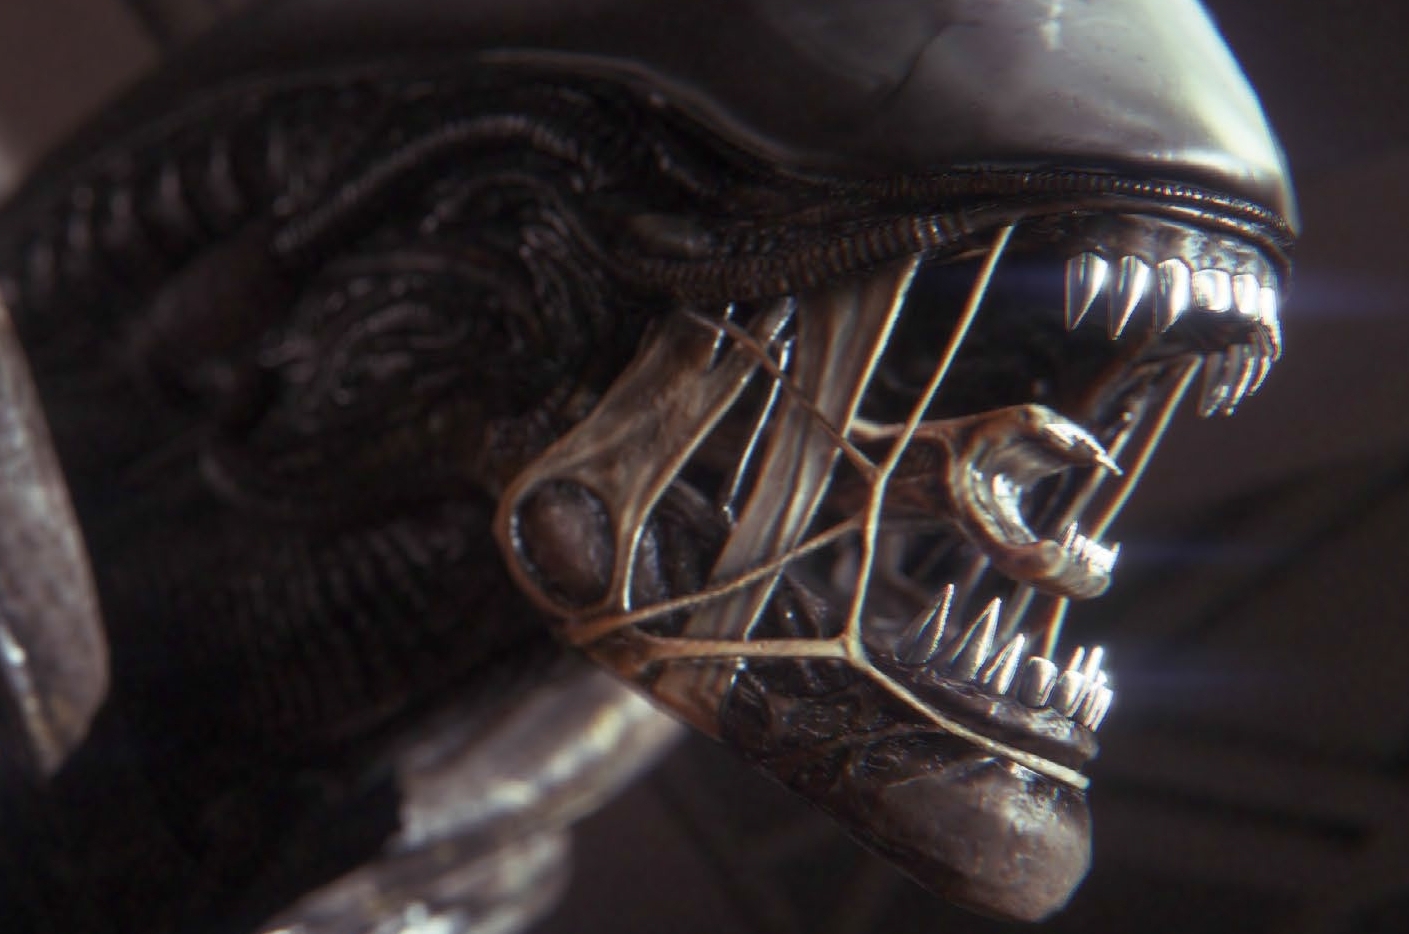 This Alien Isolation Wallpaper Is Available In Sizes